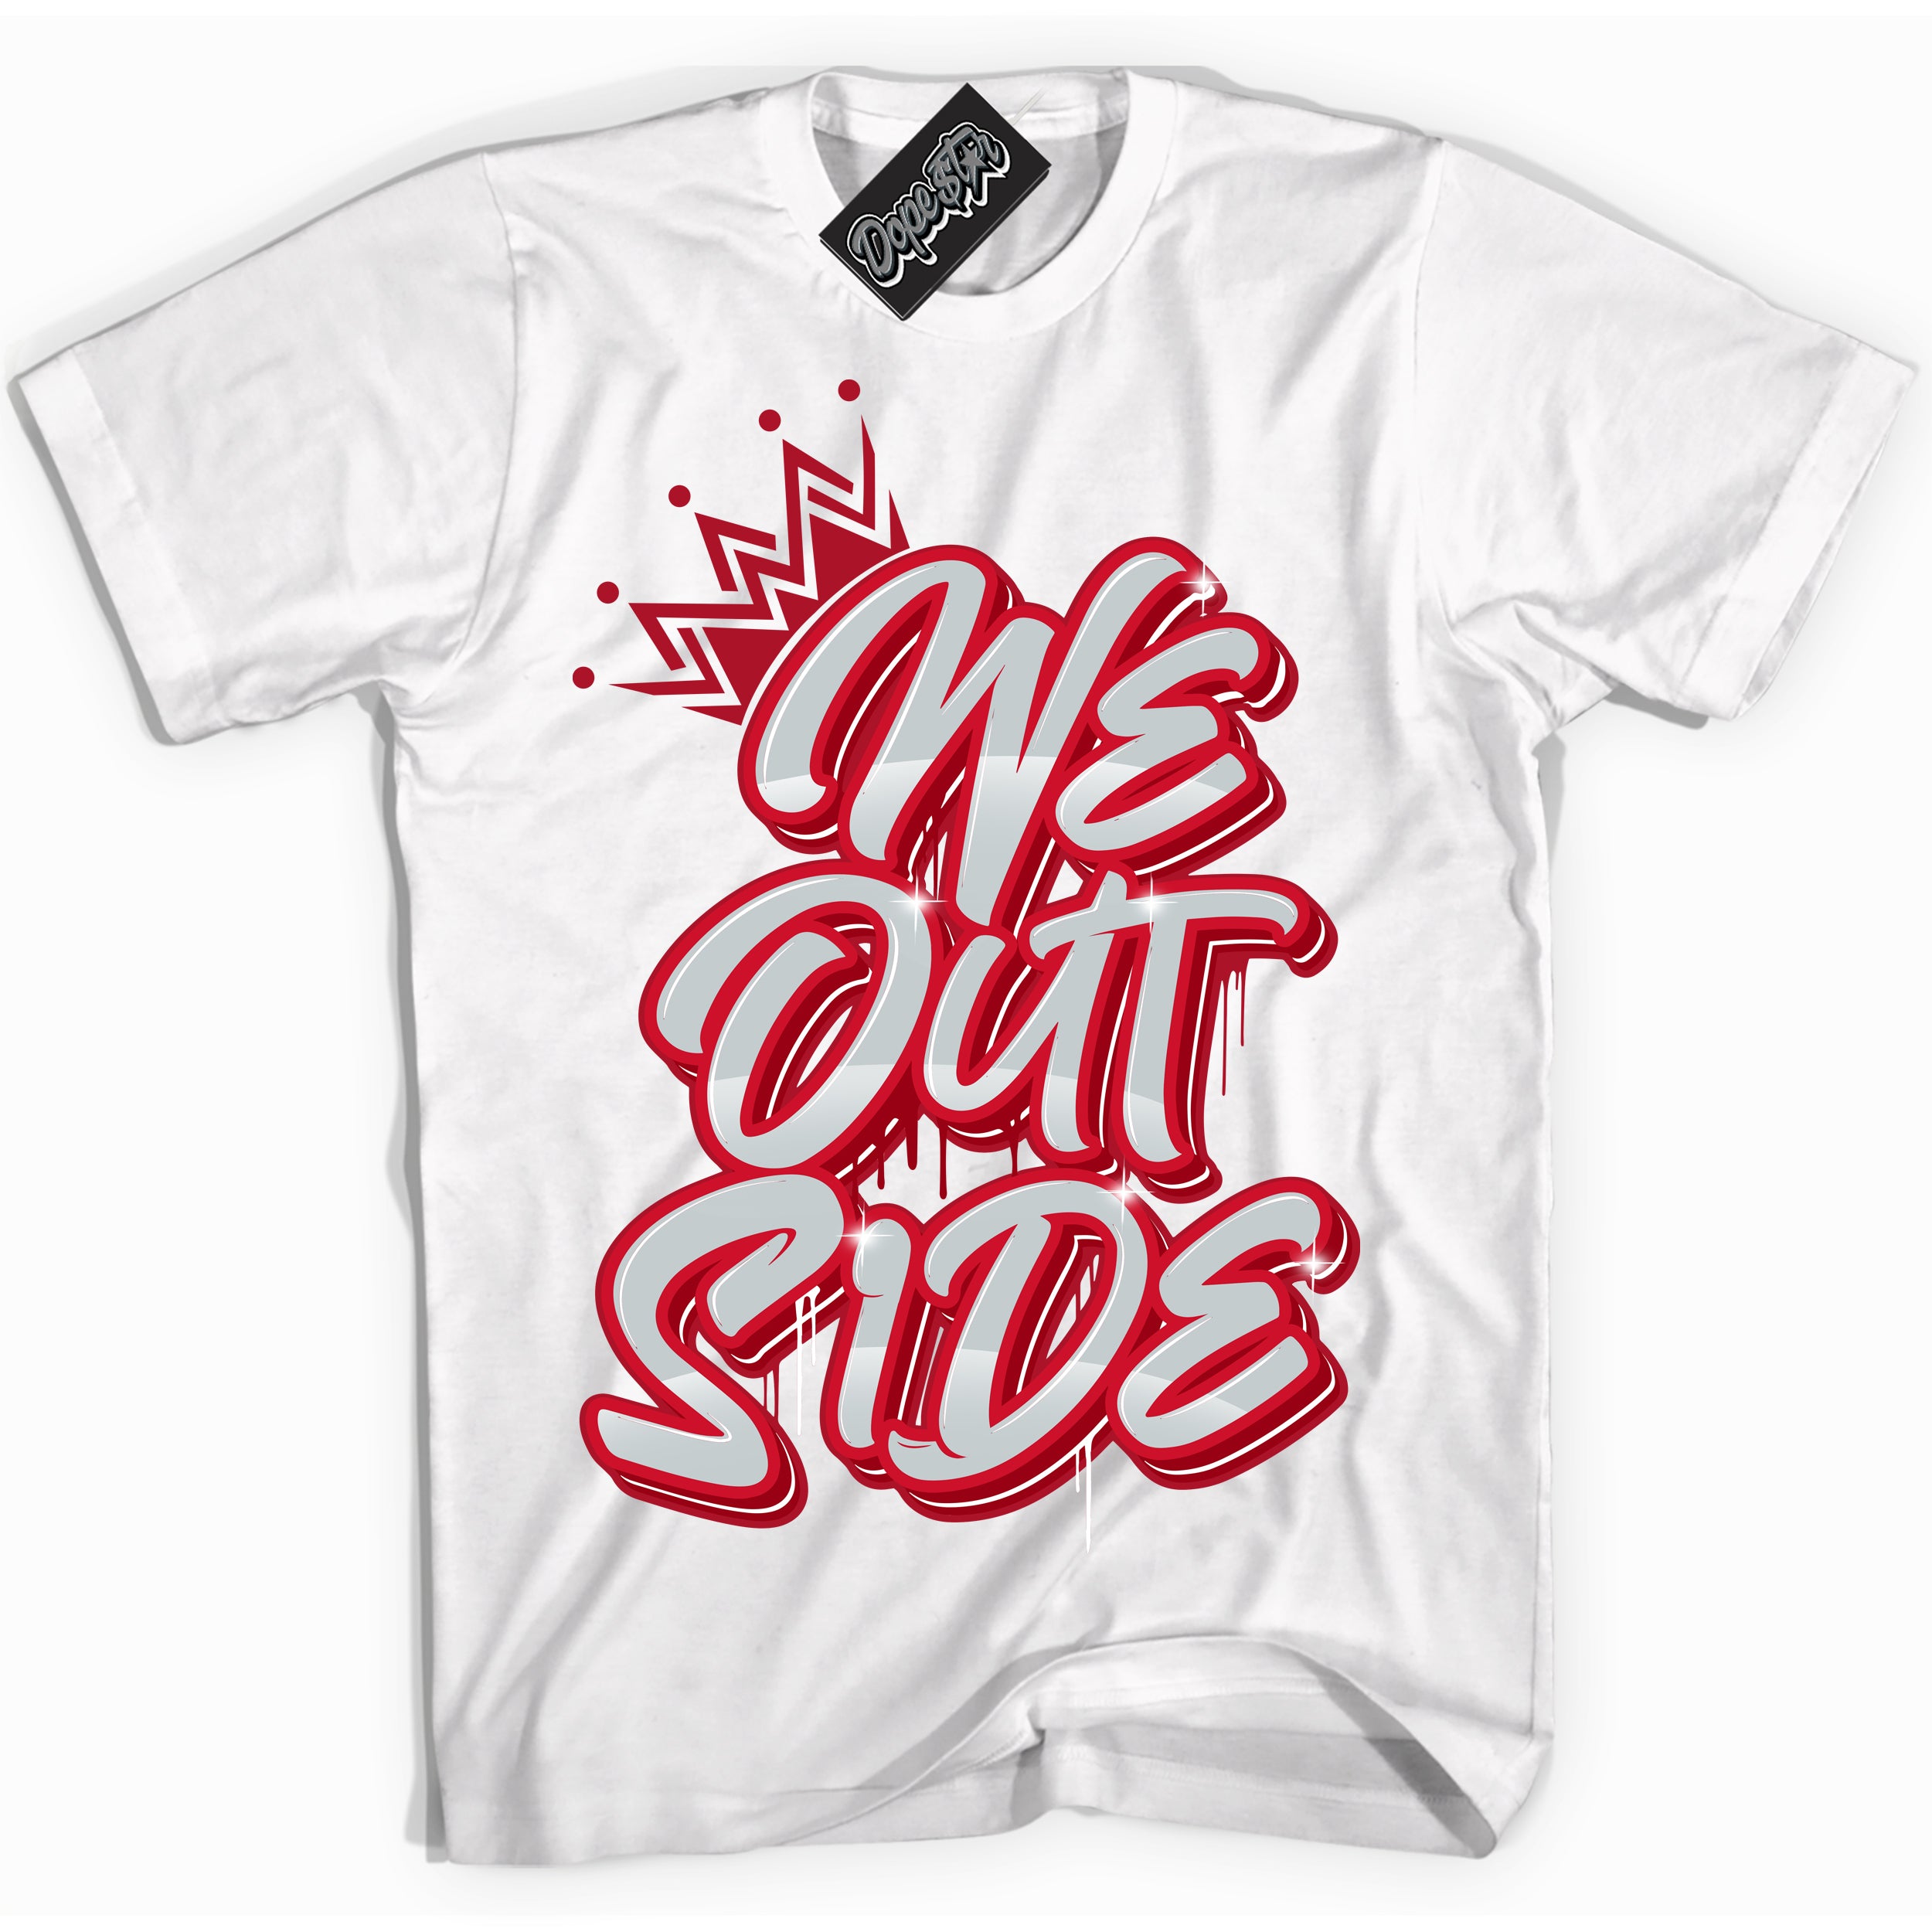 Cool White Shirt with “ We Outside ” design that perfectly matches Reverse Ultraman Sneakers.